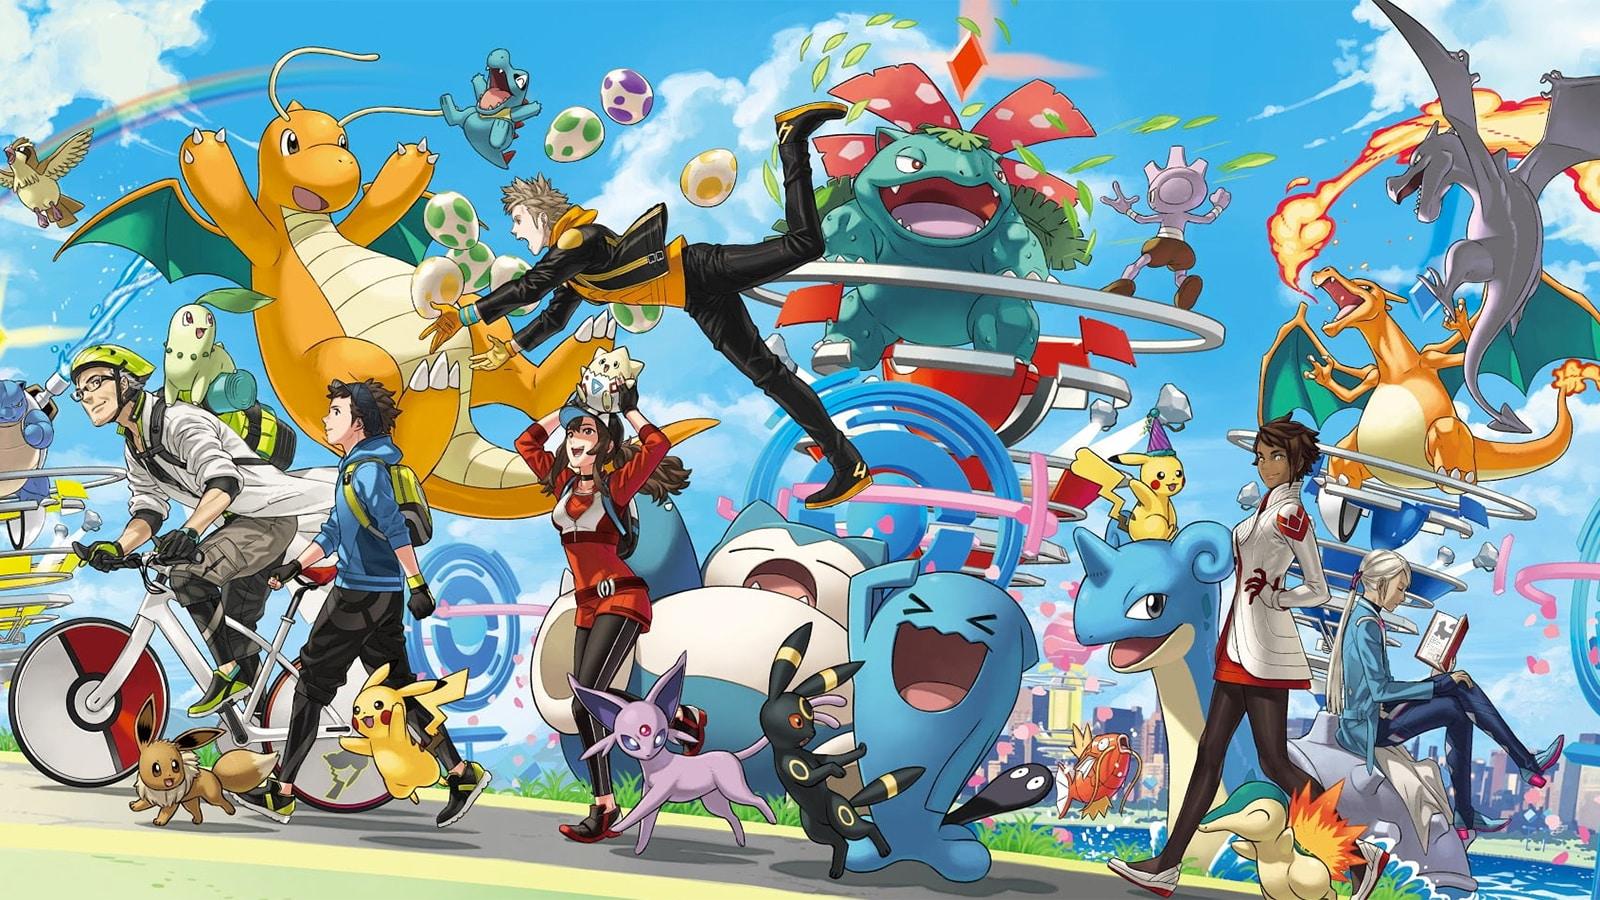 How Many Pokemon Types are There? (2023 Updated)